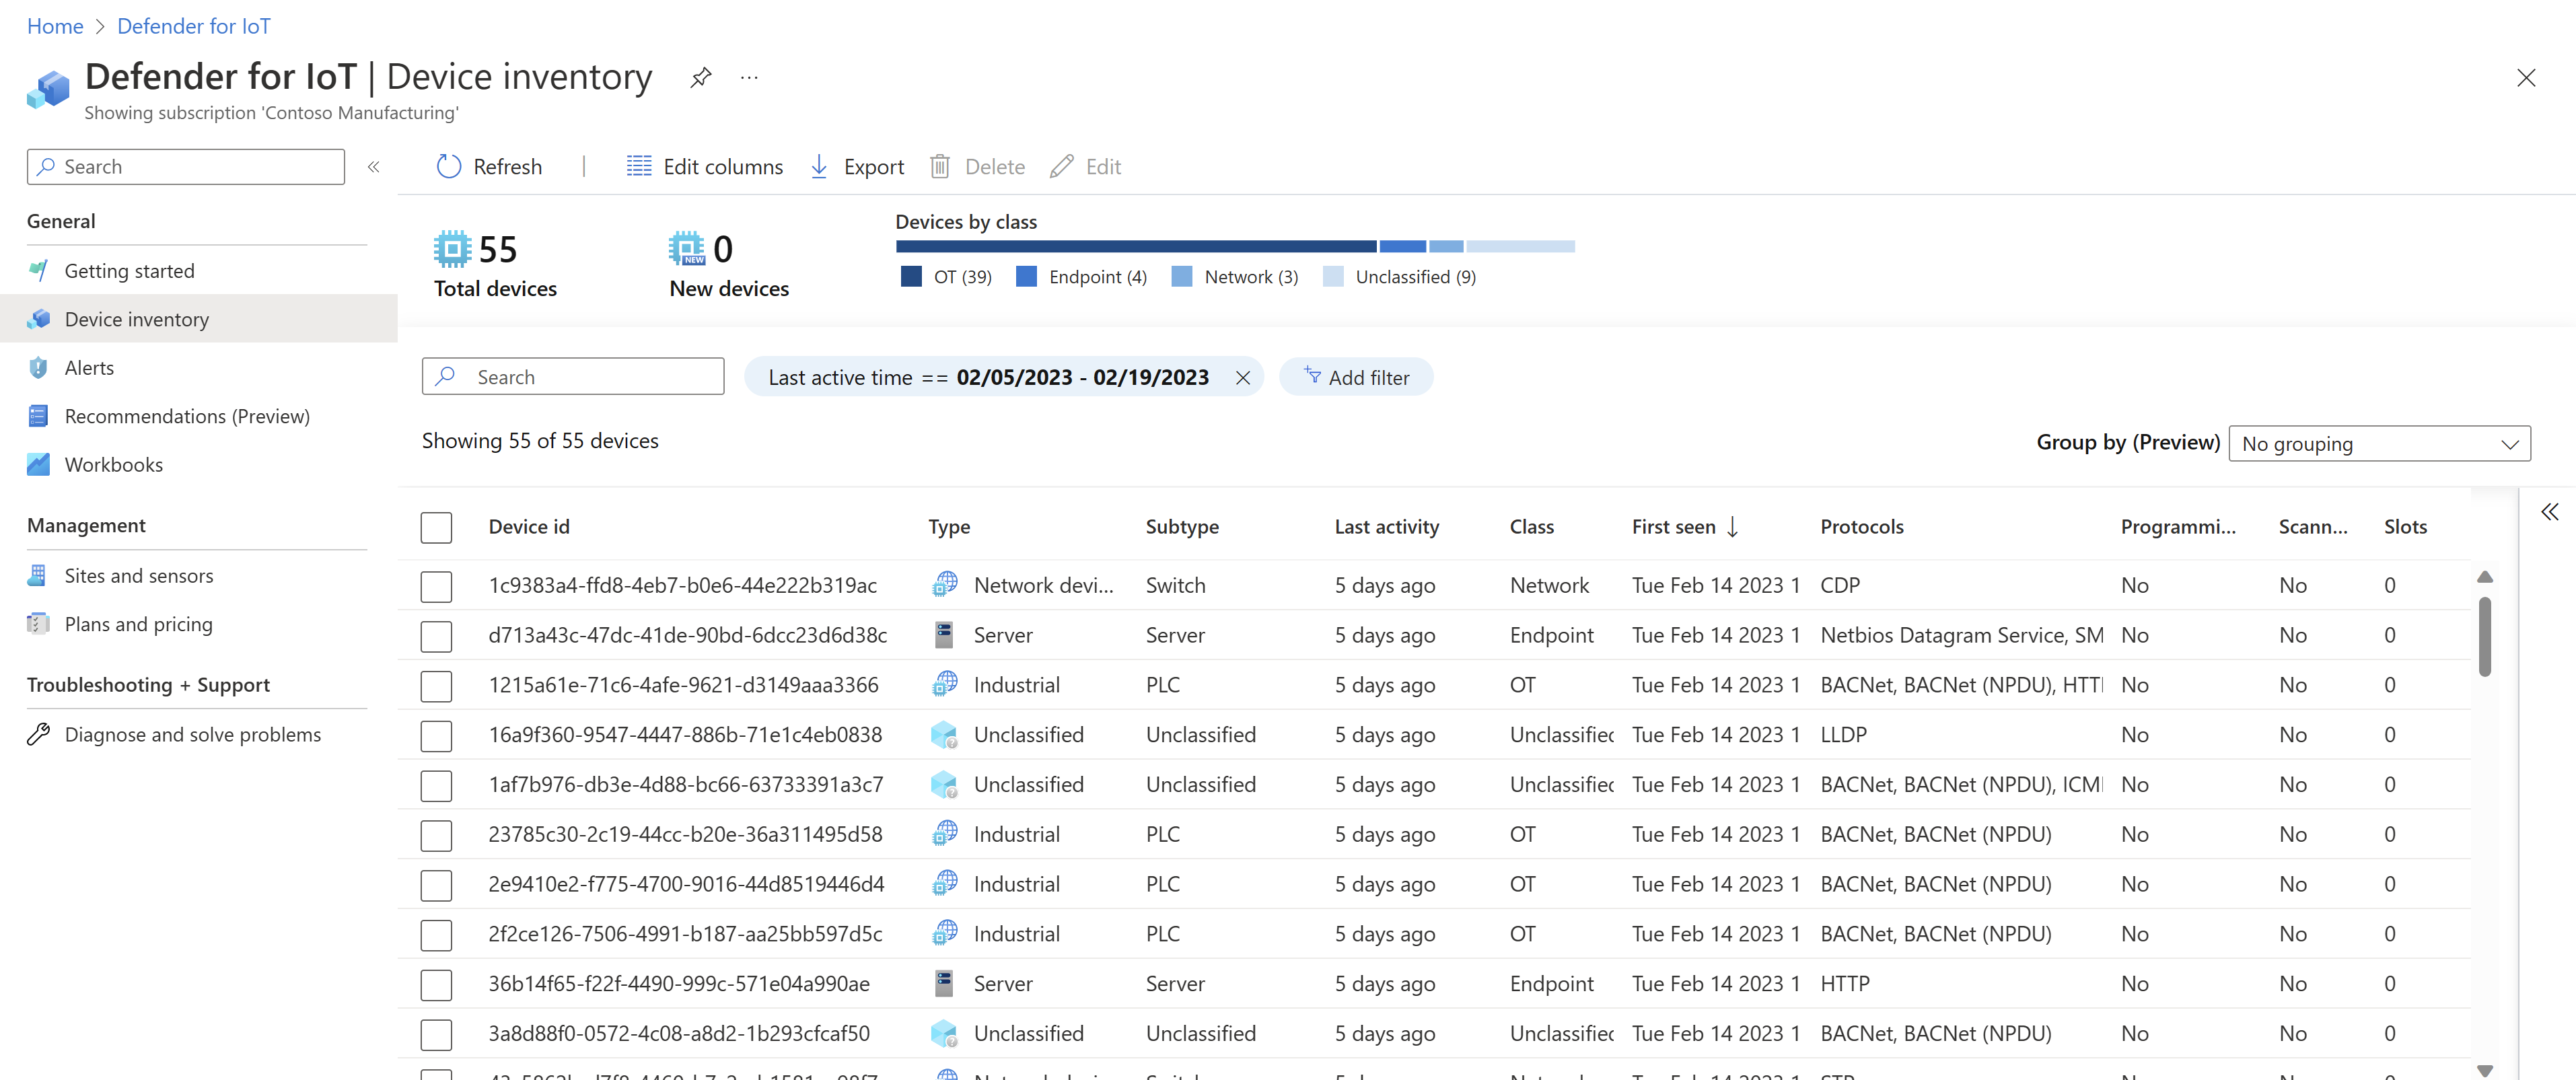 Screenshot of the Defender for IoT Device inventory page in the Azure portal.